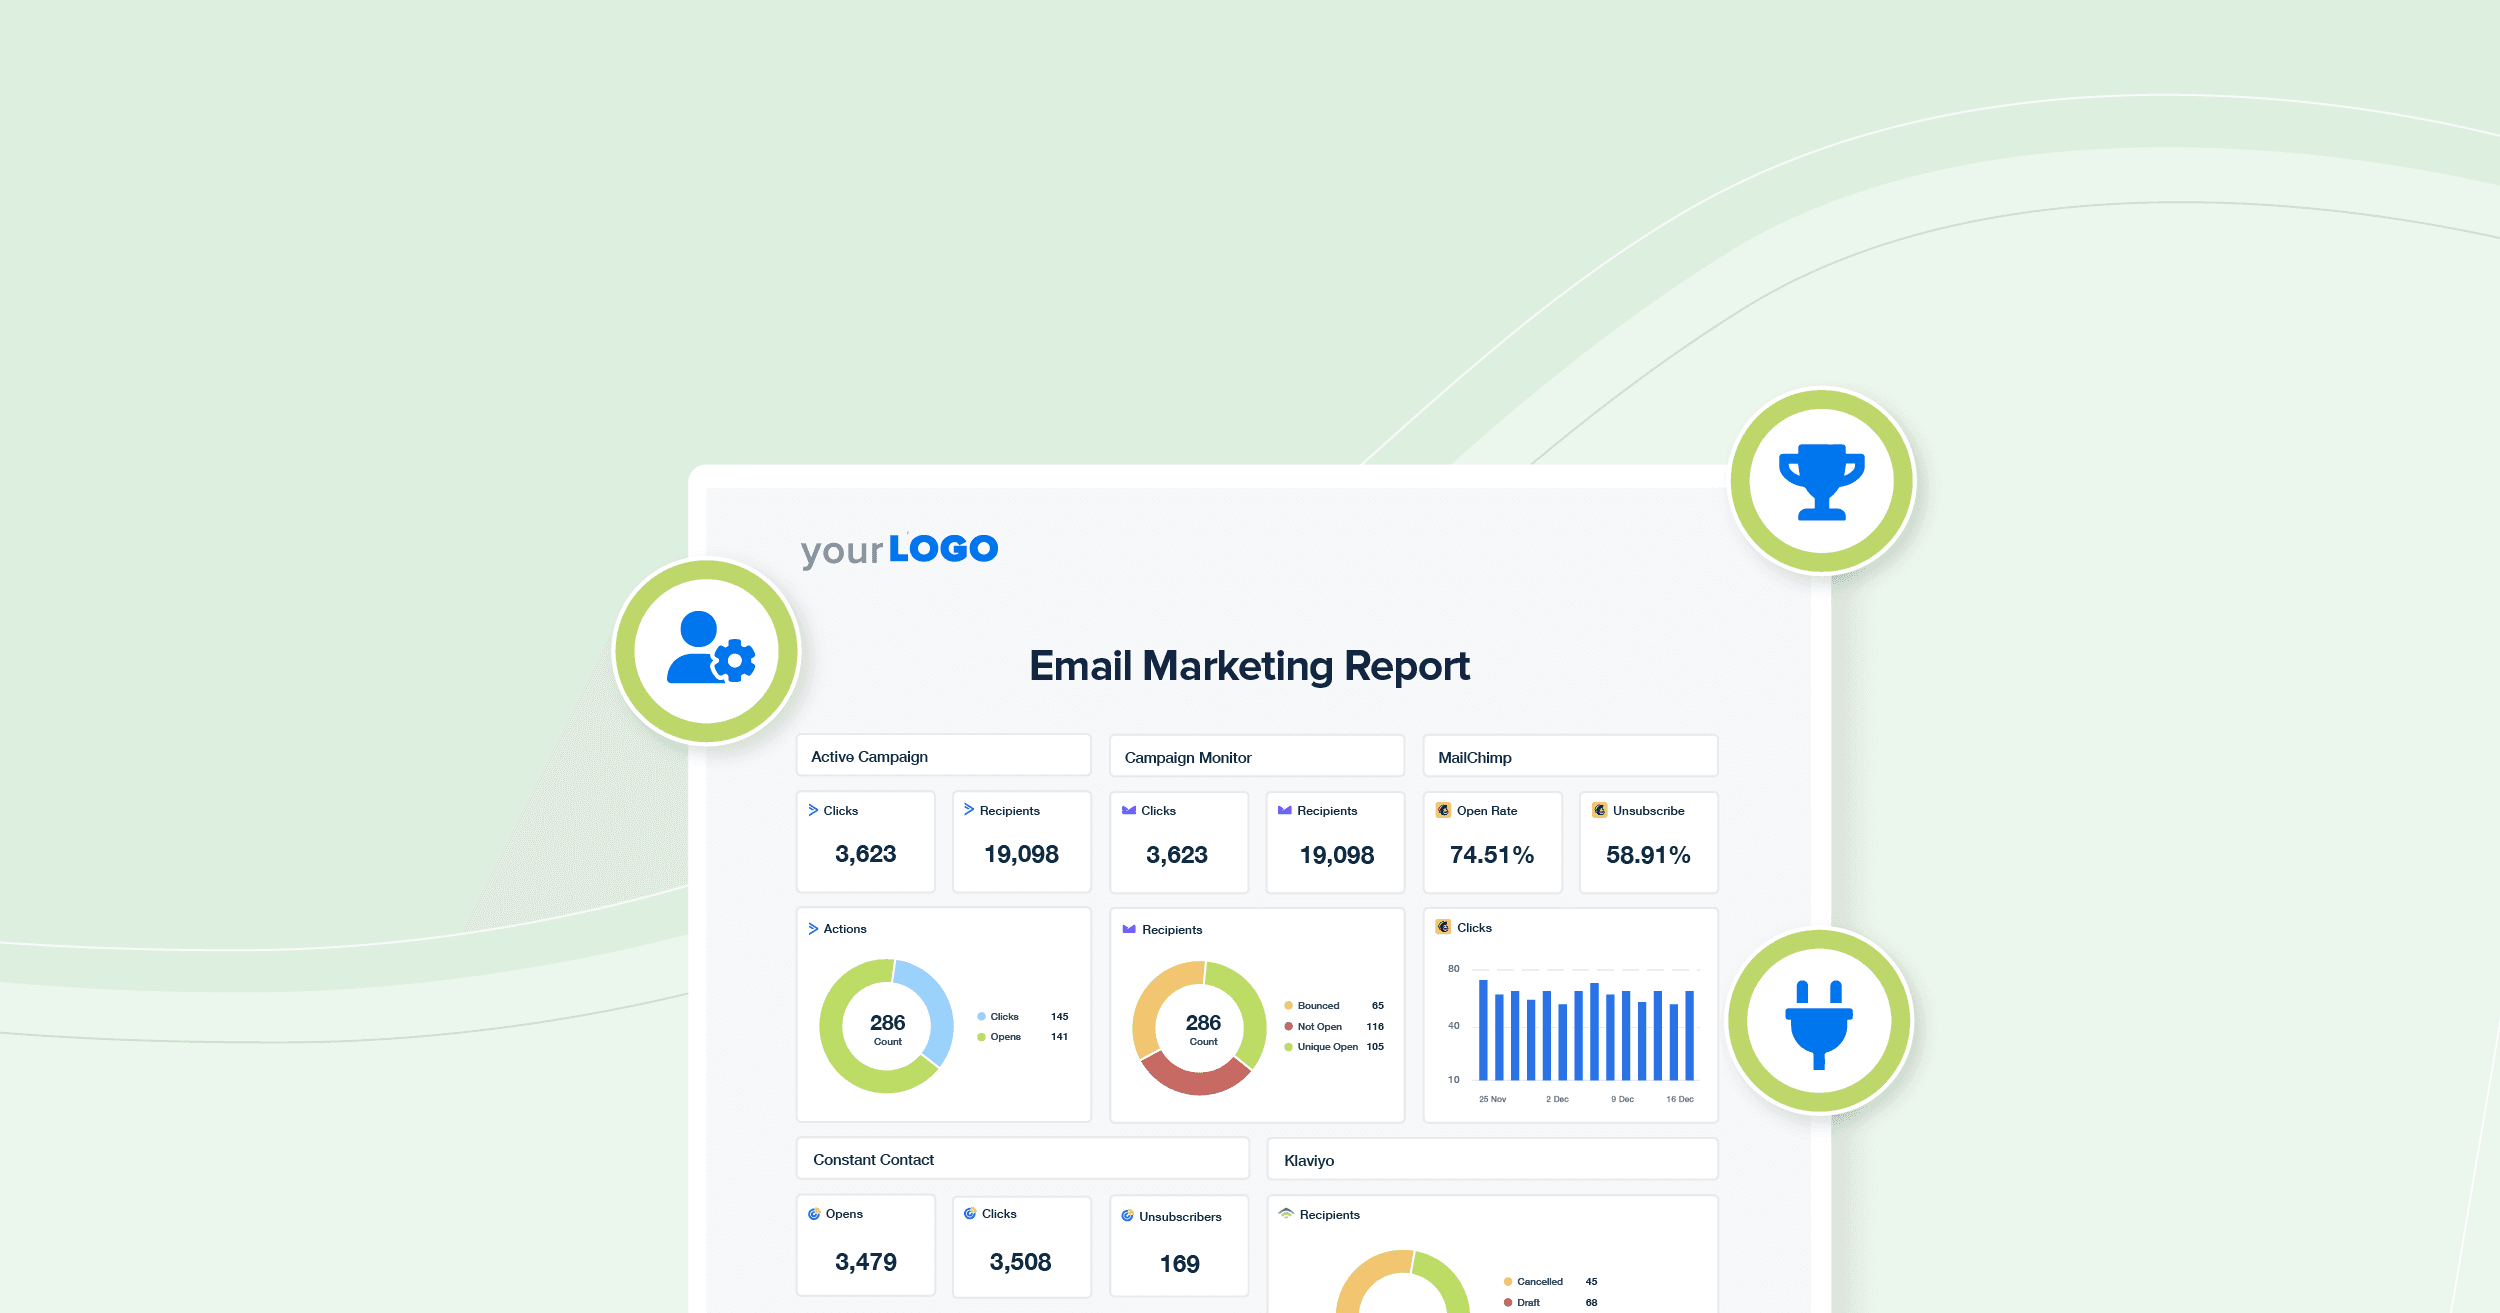 What Makes a Great Email Marketing Analytics Report